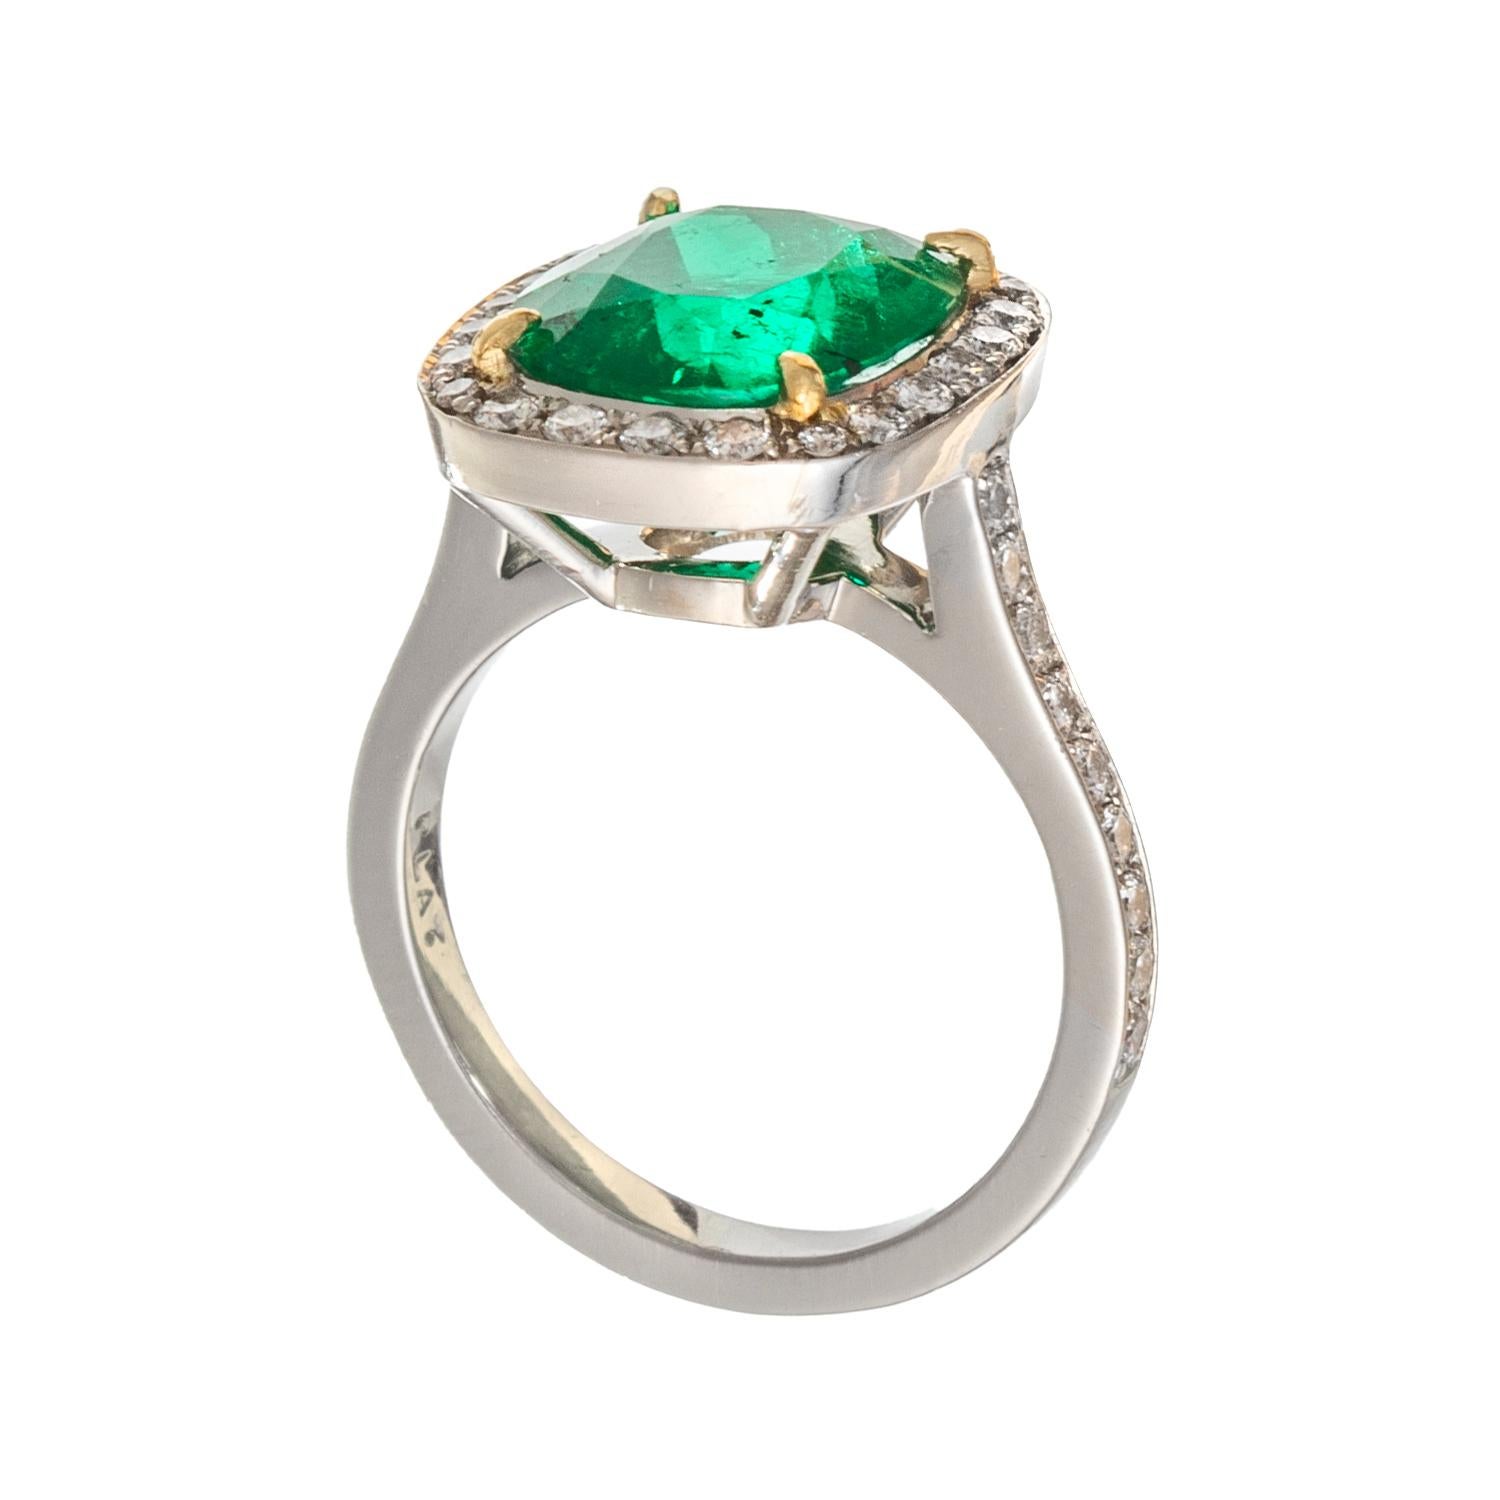 Fine handmade platinum ring, centering a cushion-shaped faceted, natural Colombian emerald, framed by round brilliant-cut diamonds with partway bead-set round brilliant-cut diamond shoulders.  Emerald weighing 3.94 carats and measuring 11.33 x 10.03